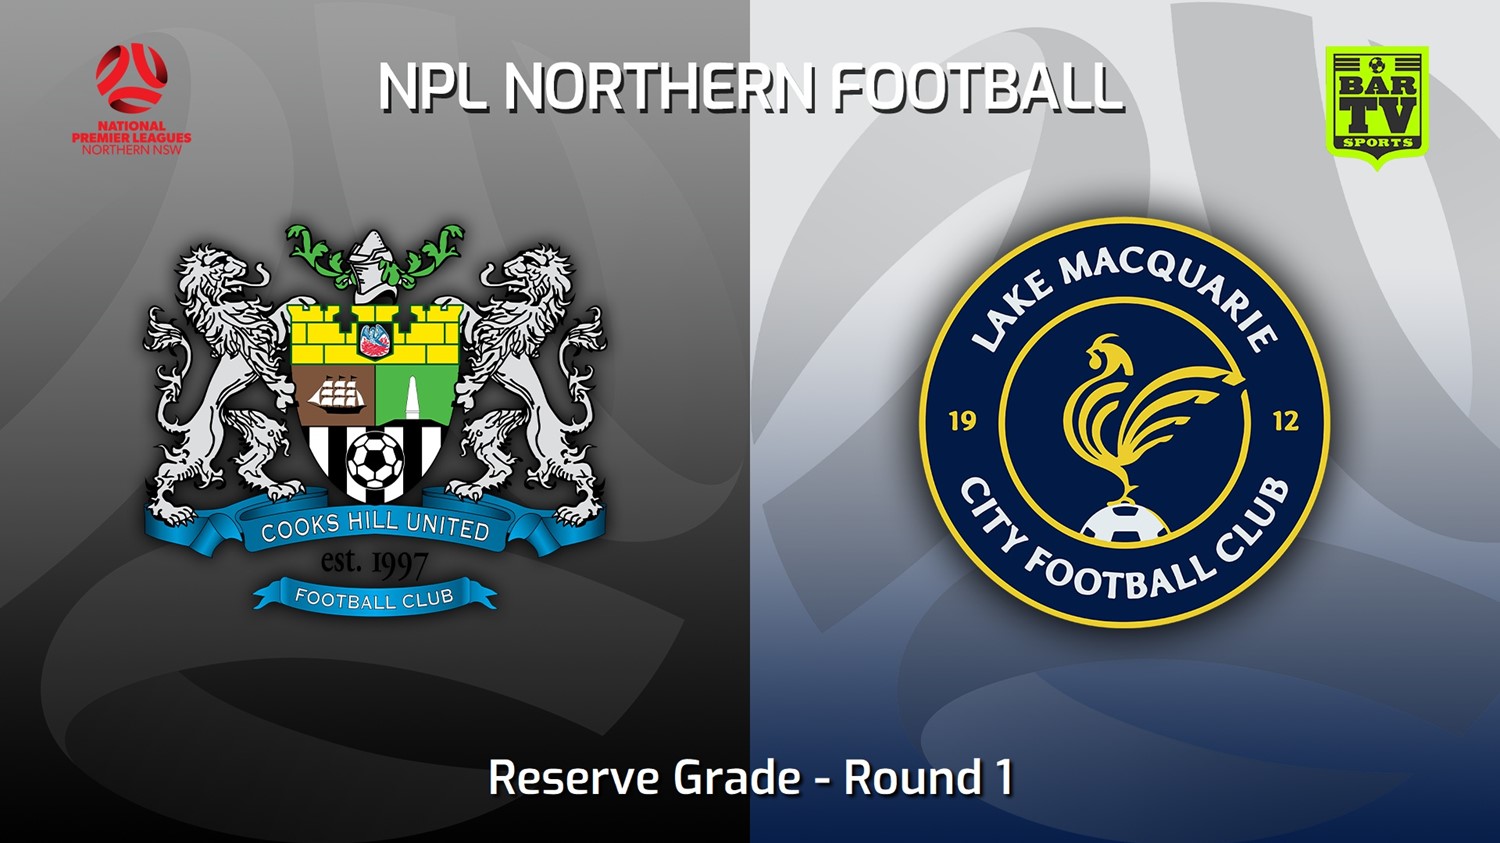 230304-NNSW NPLM Res Round 1 - Cooks Hill United FC (Res) v Lake Macquarie City FC Res Minigame Slate Image